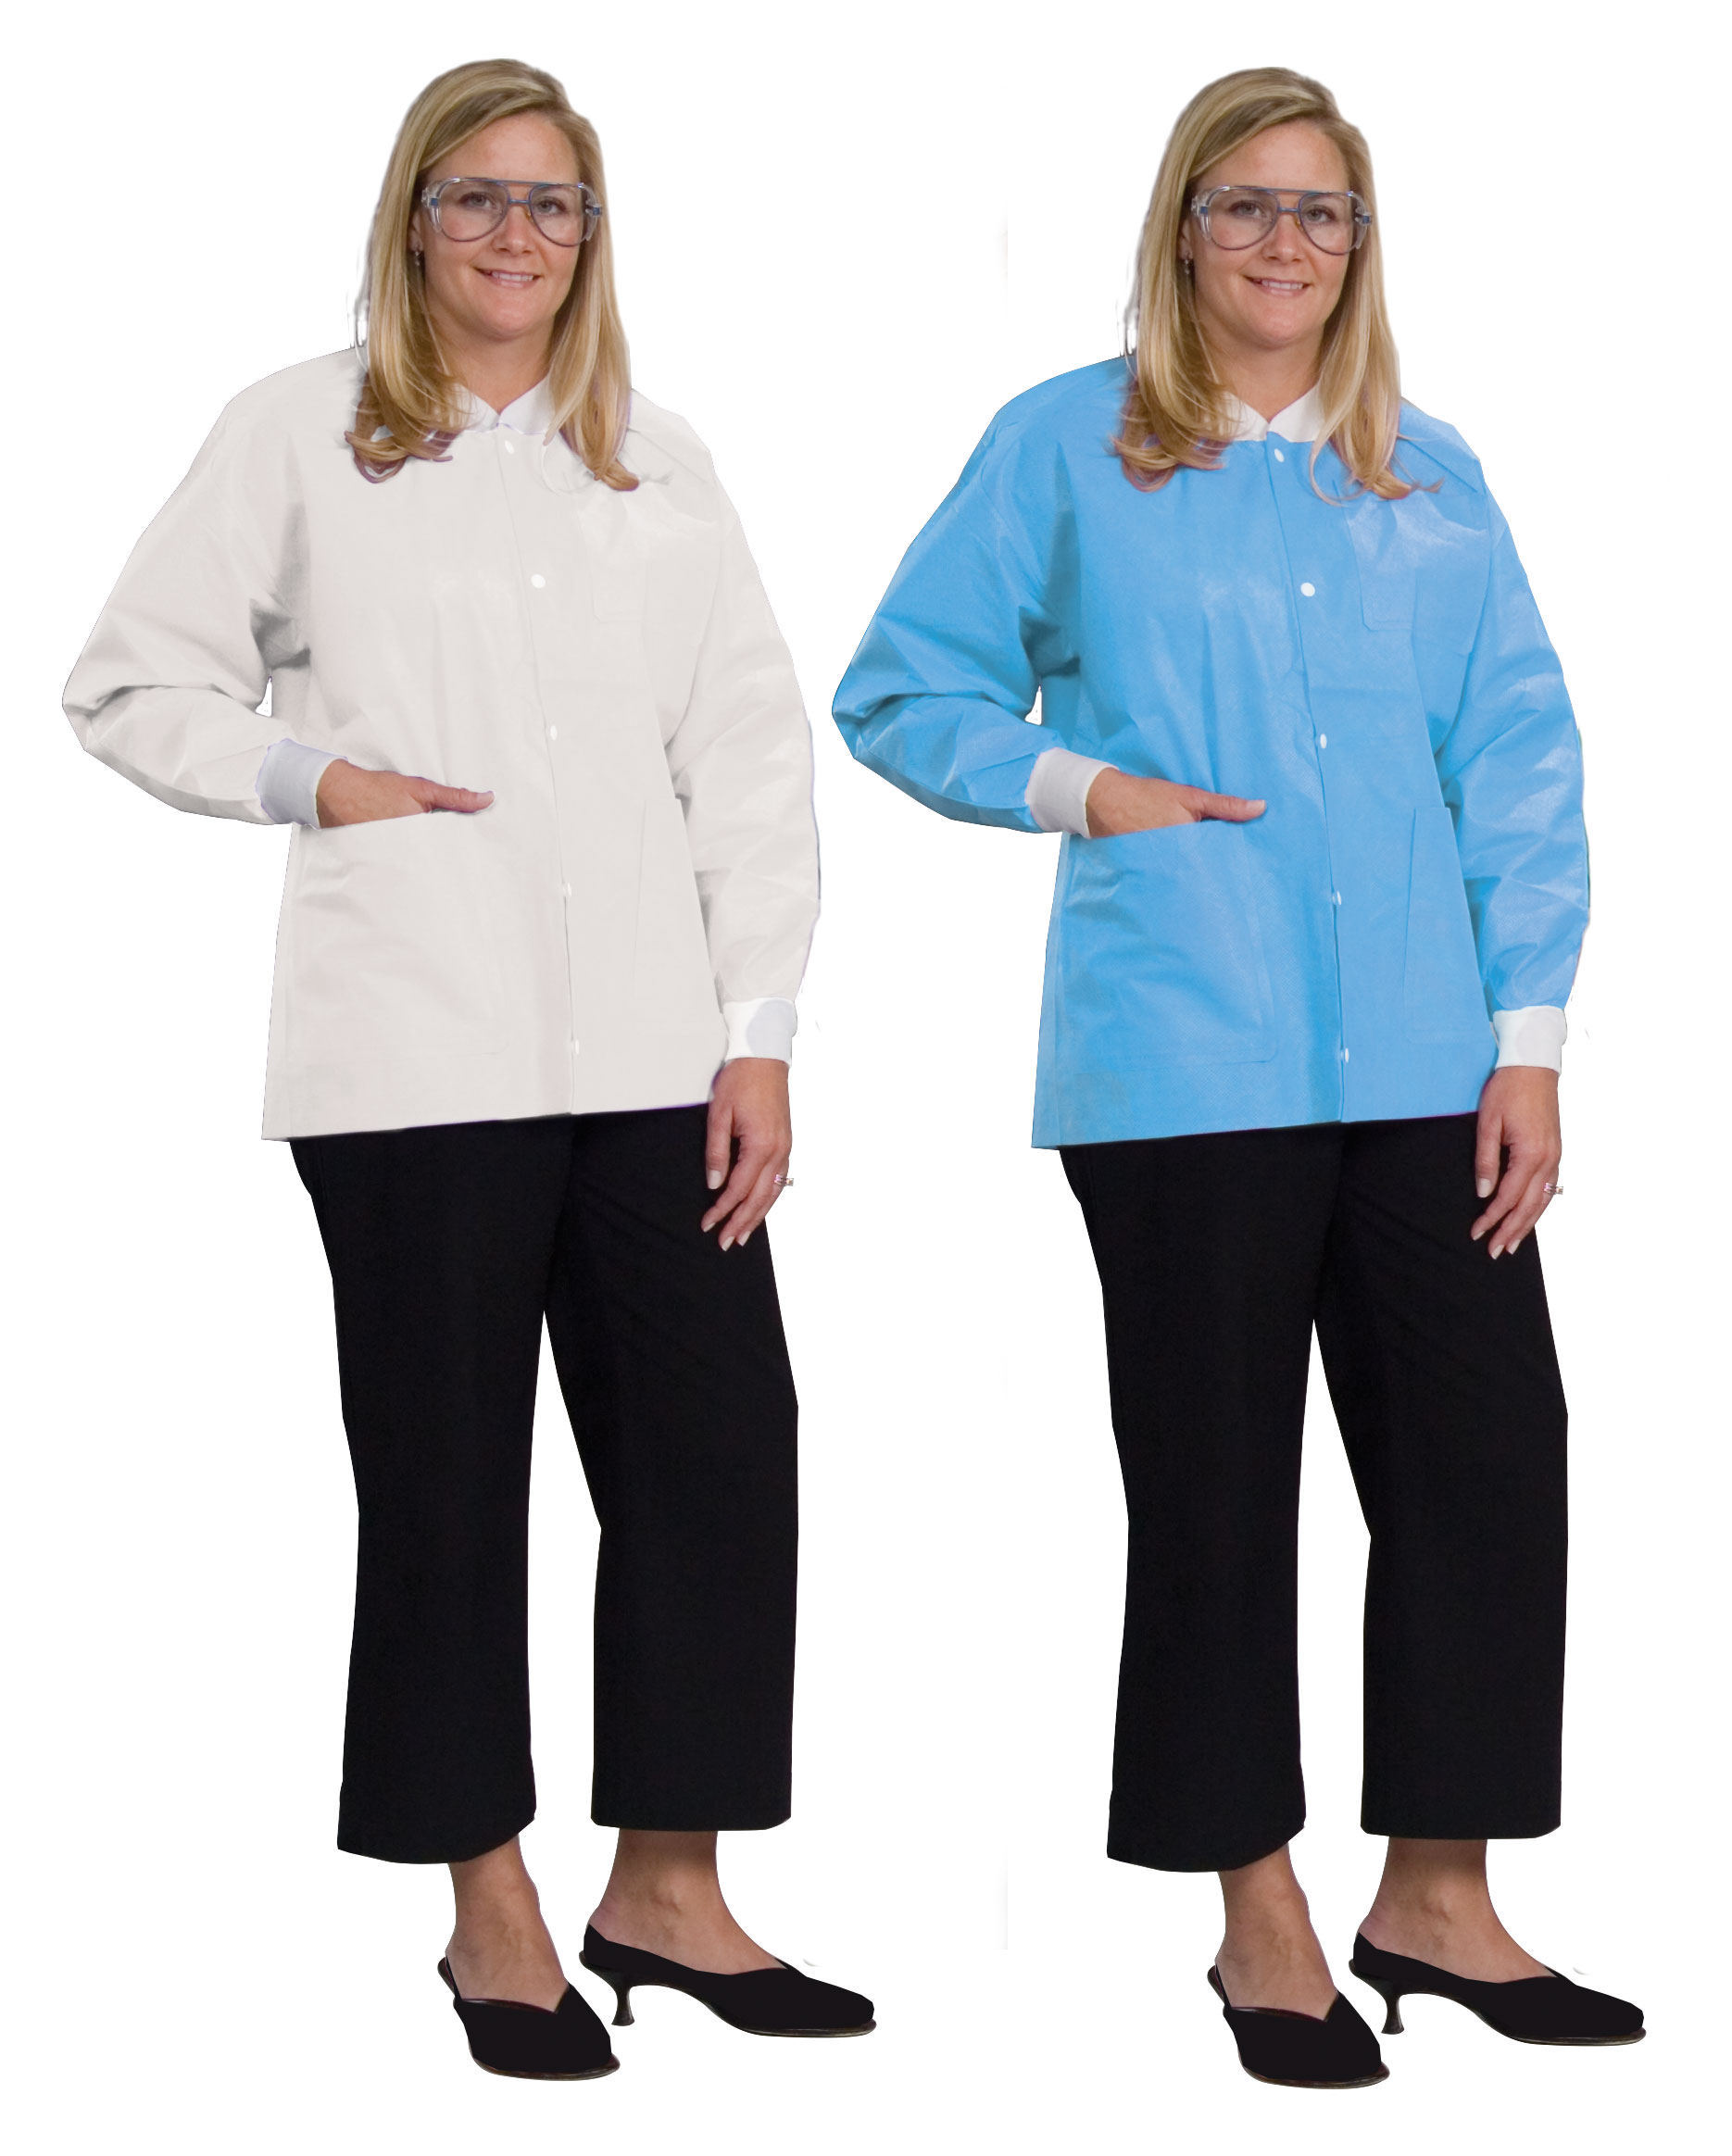 DenLine "In Stock" Disposable Mid-Length Lab Jacket Styles